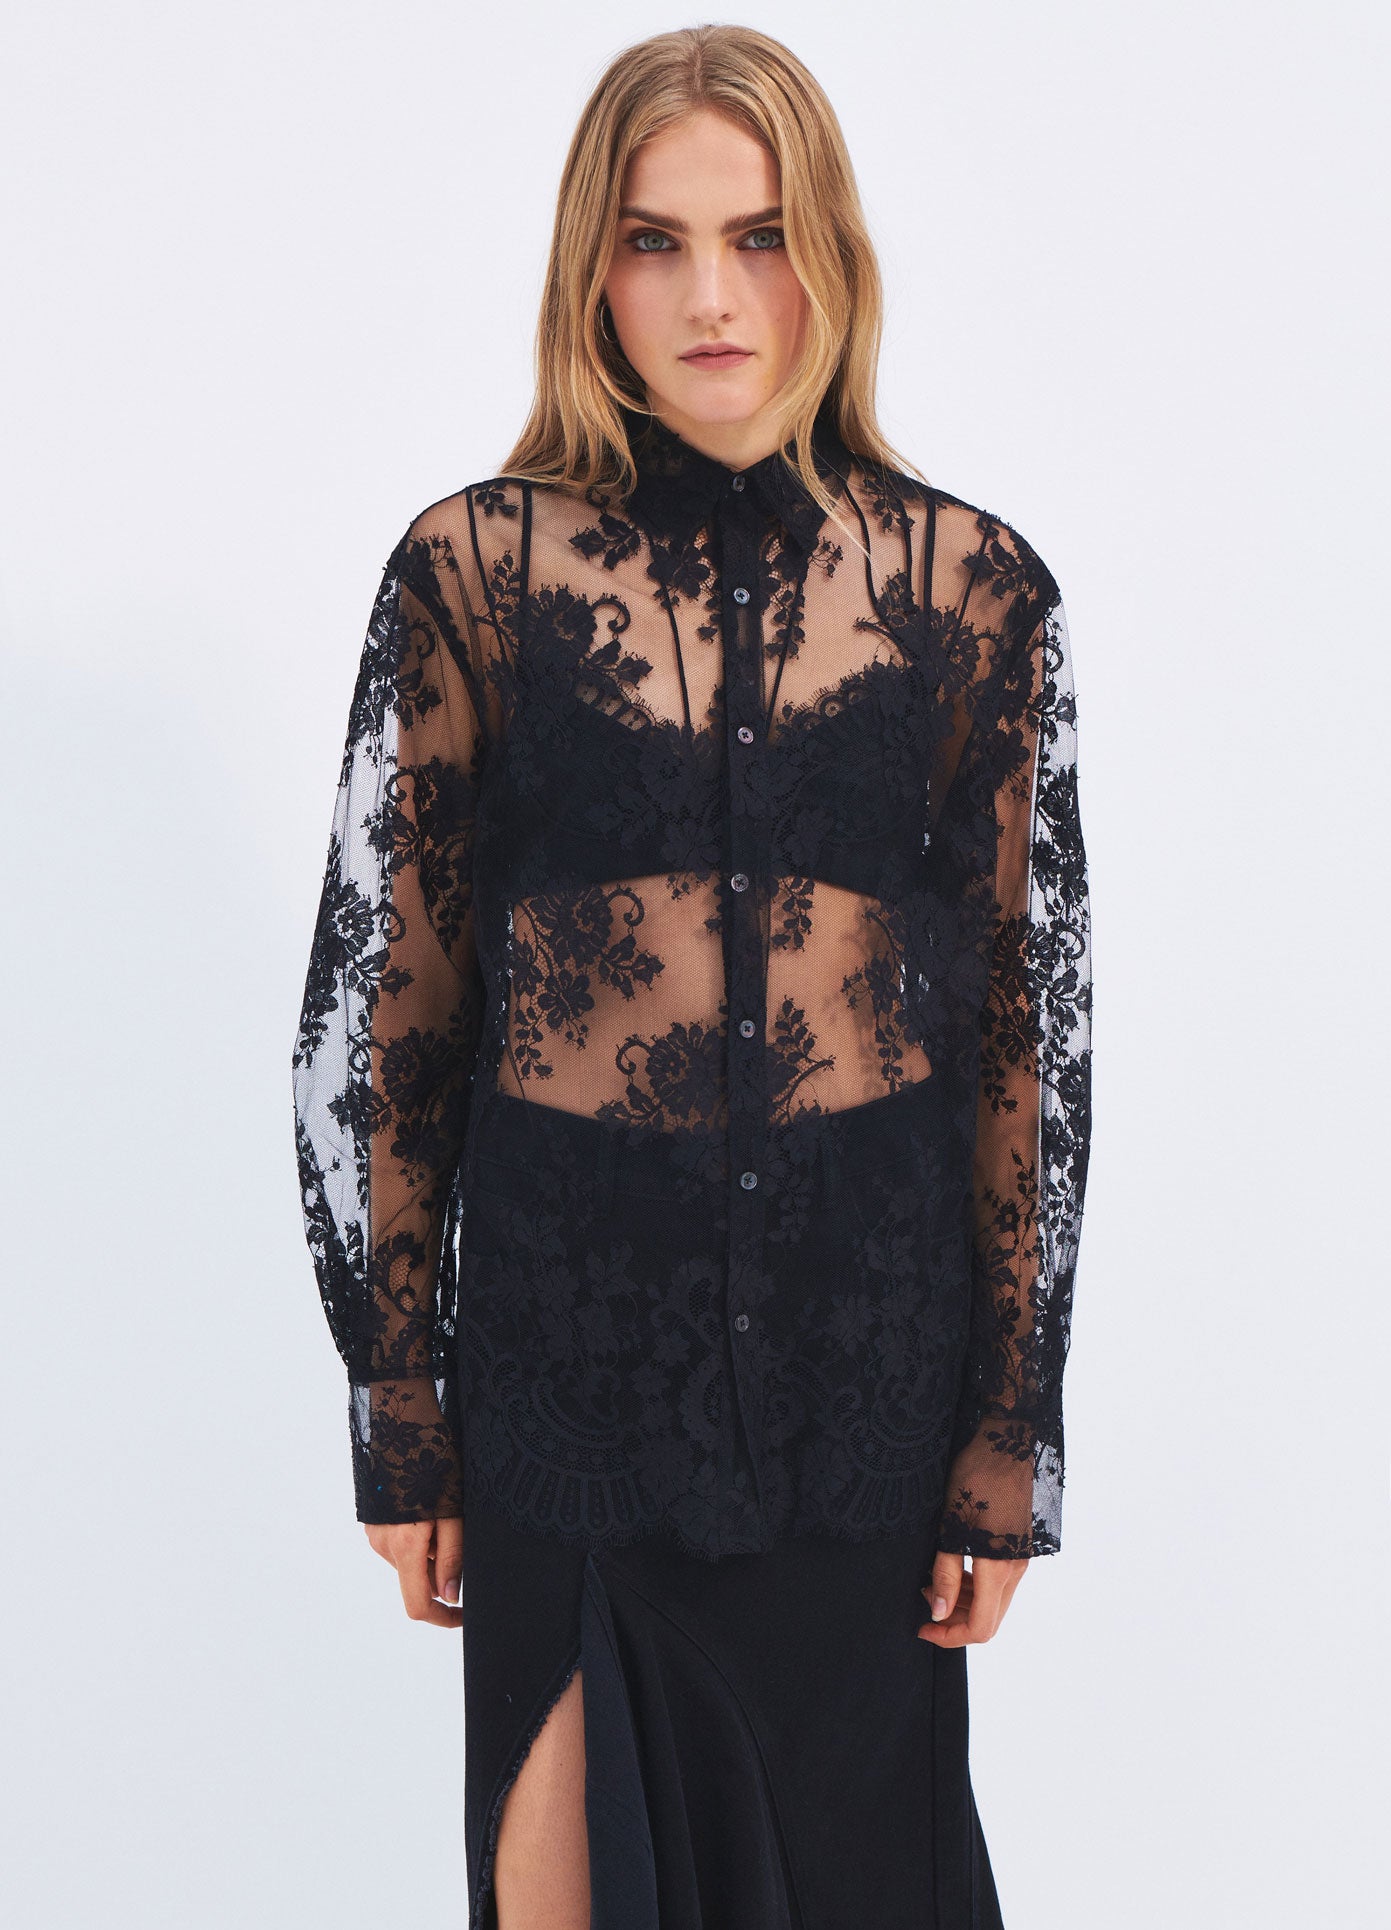 MONSE Spring 2024 Lace Open Back Detail Blouse in Black on model front view